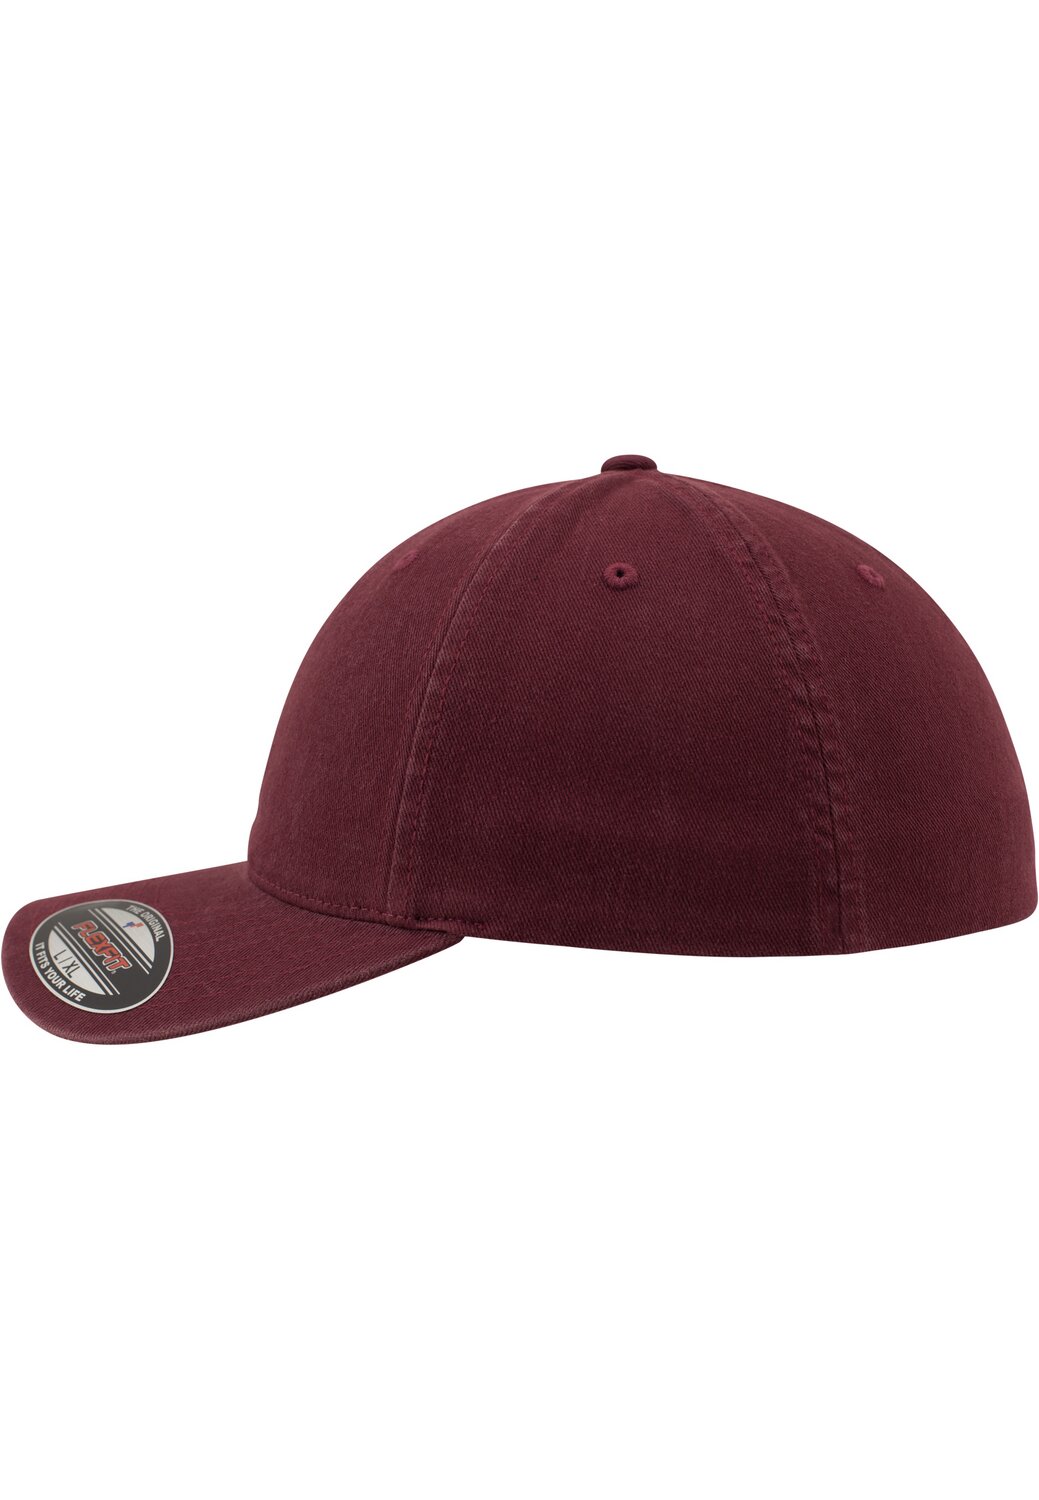 Cotton MAXISCOOT Washed | Dad Flexfit Hat Garment maroon